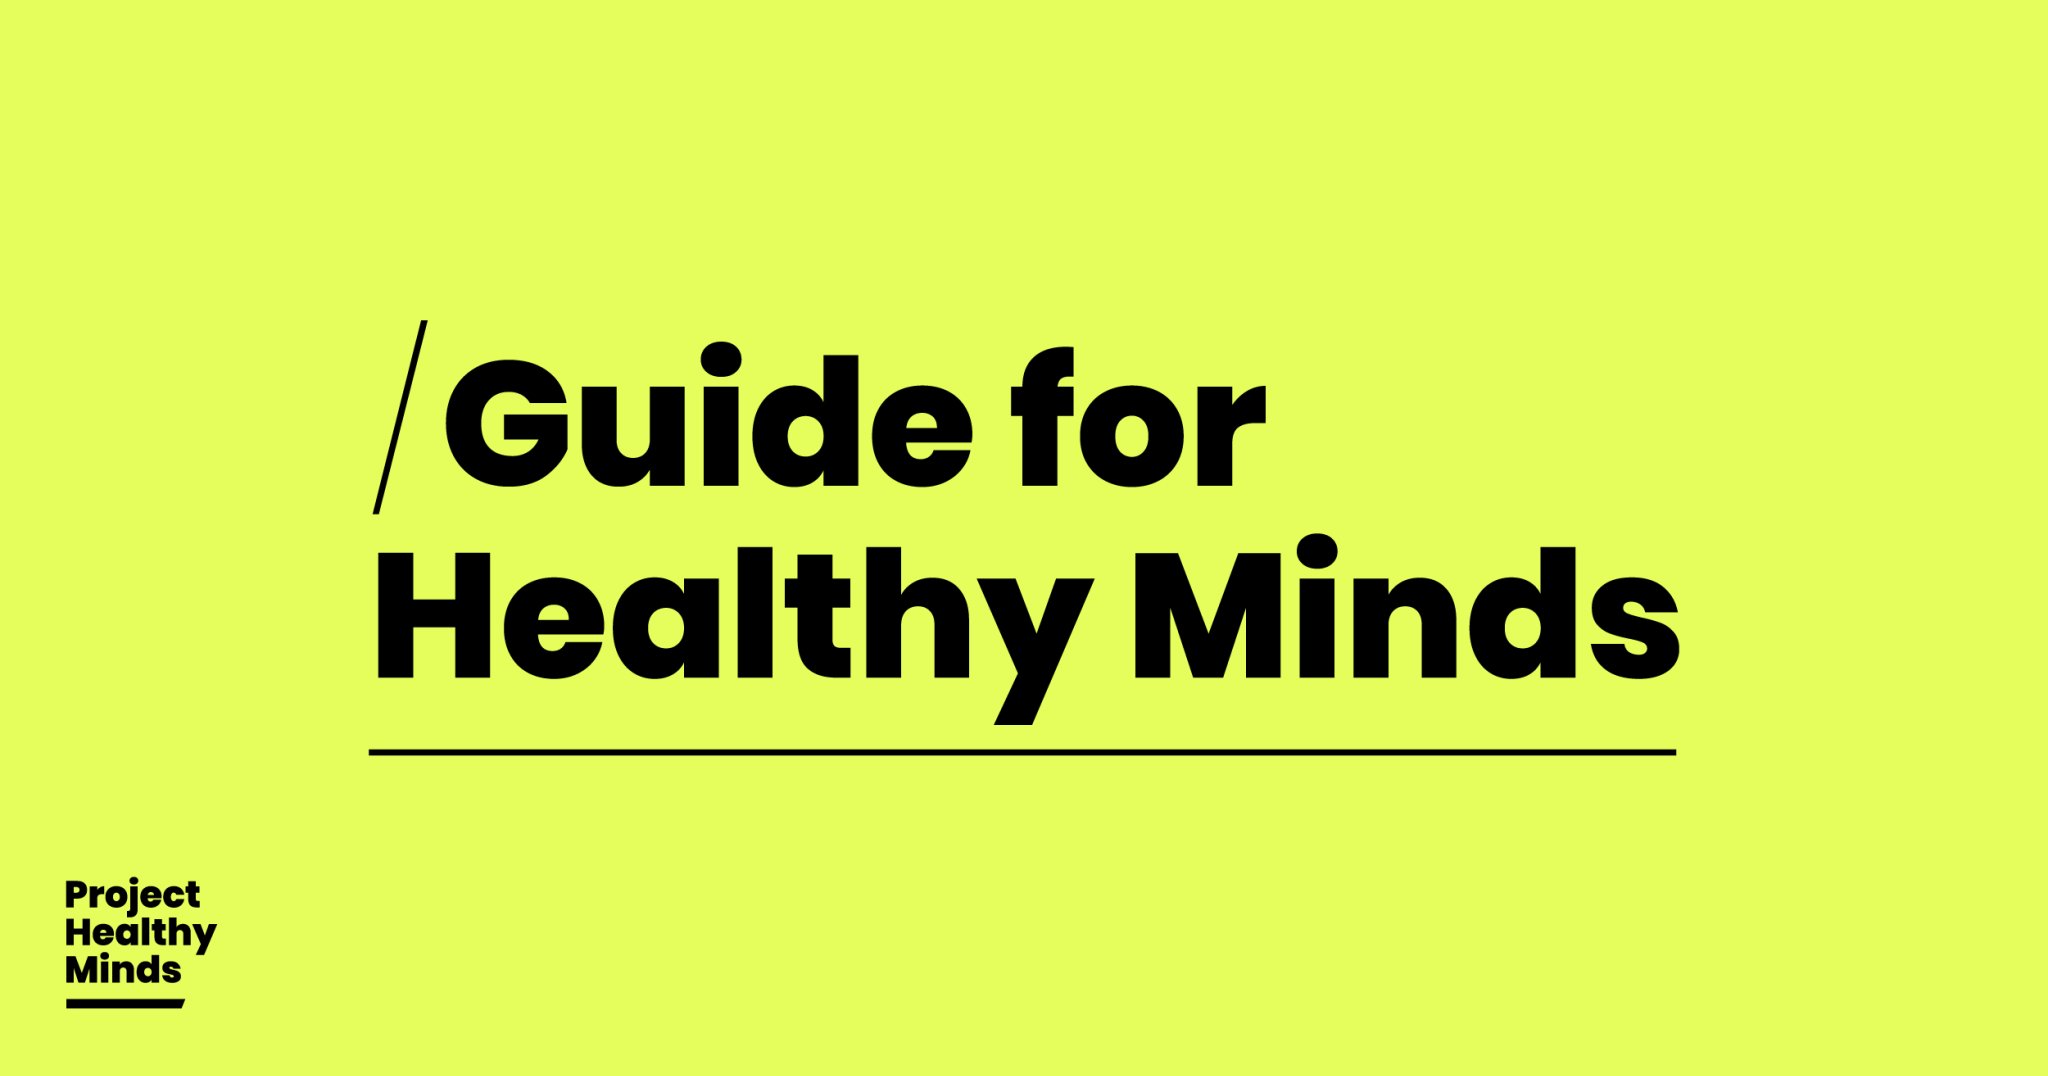 Guide for Healthy Minds